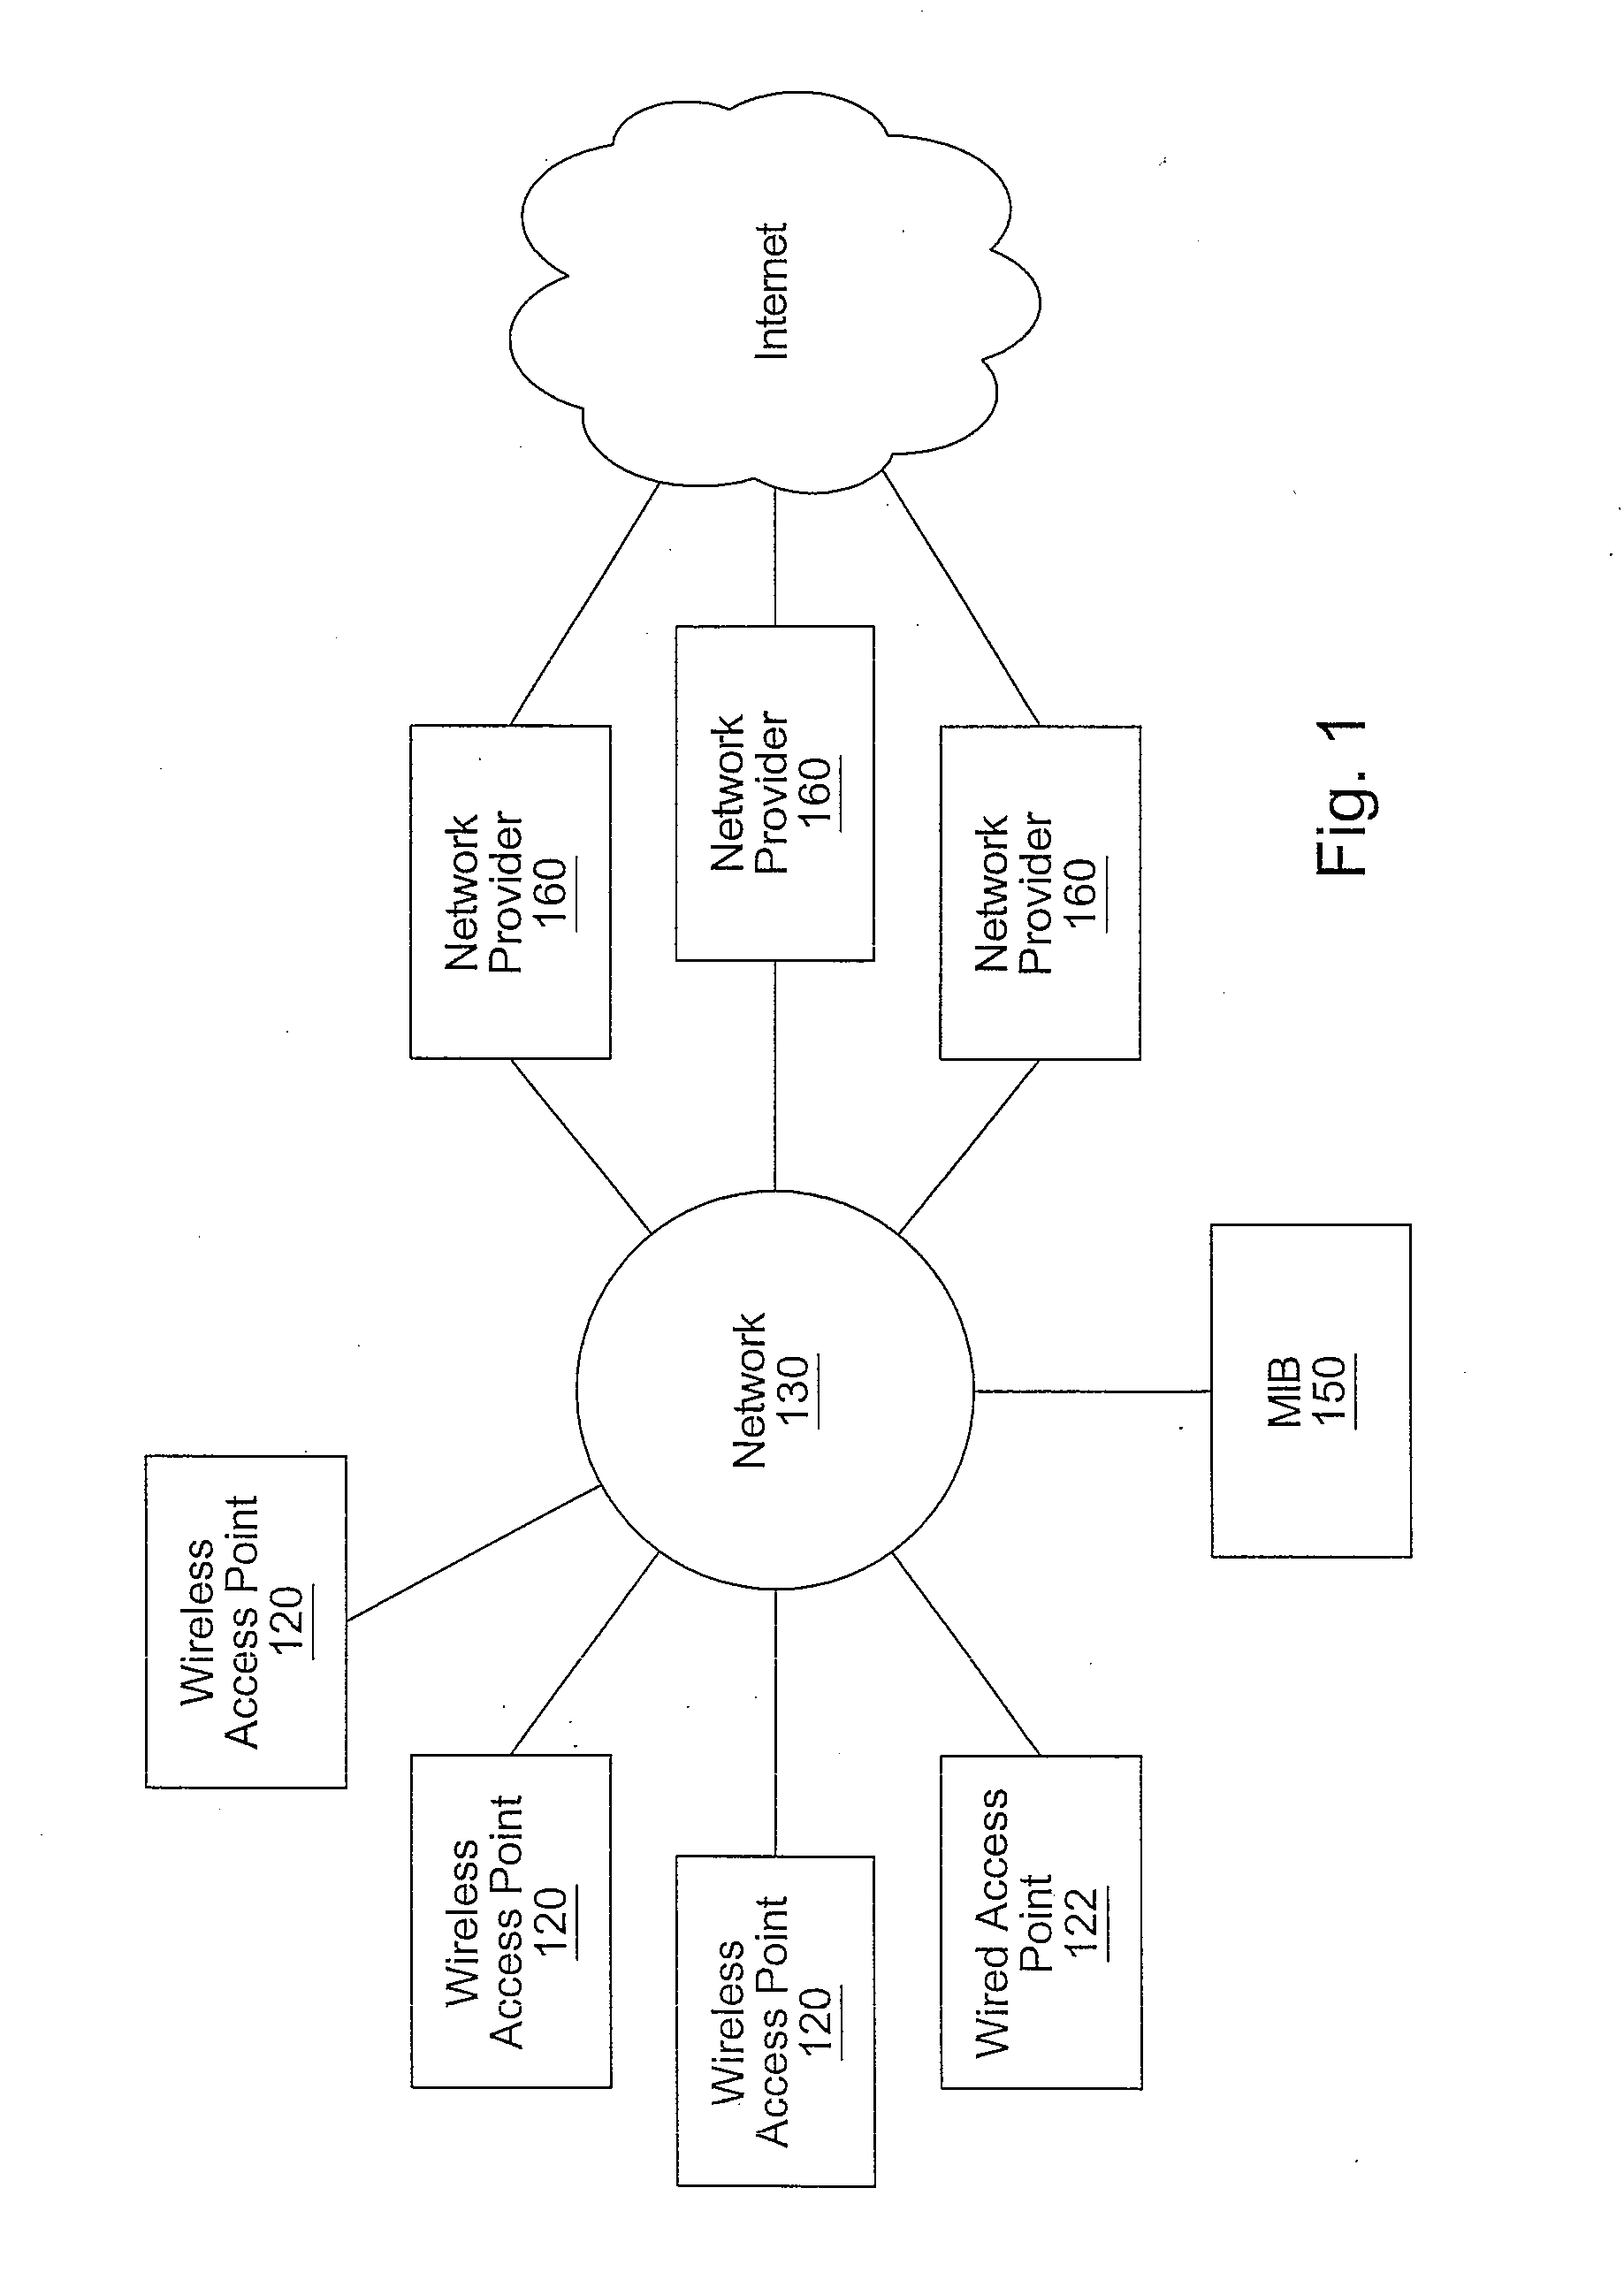 Authorization and authentication of user access to a distributed network communication system with roaming feature